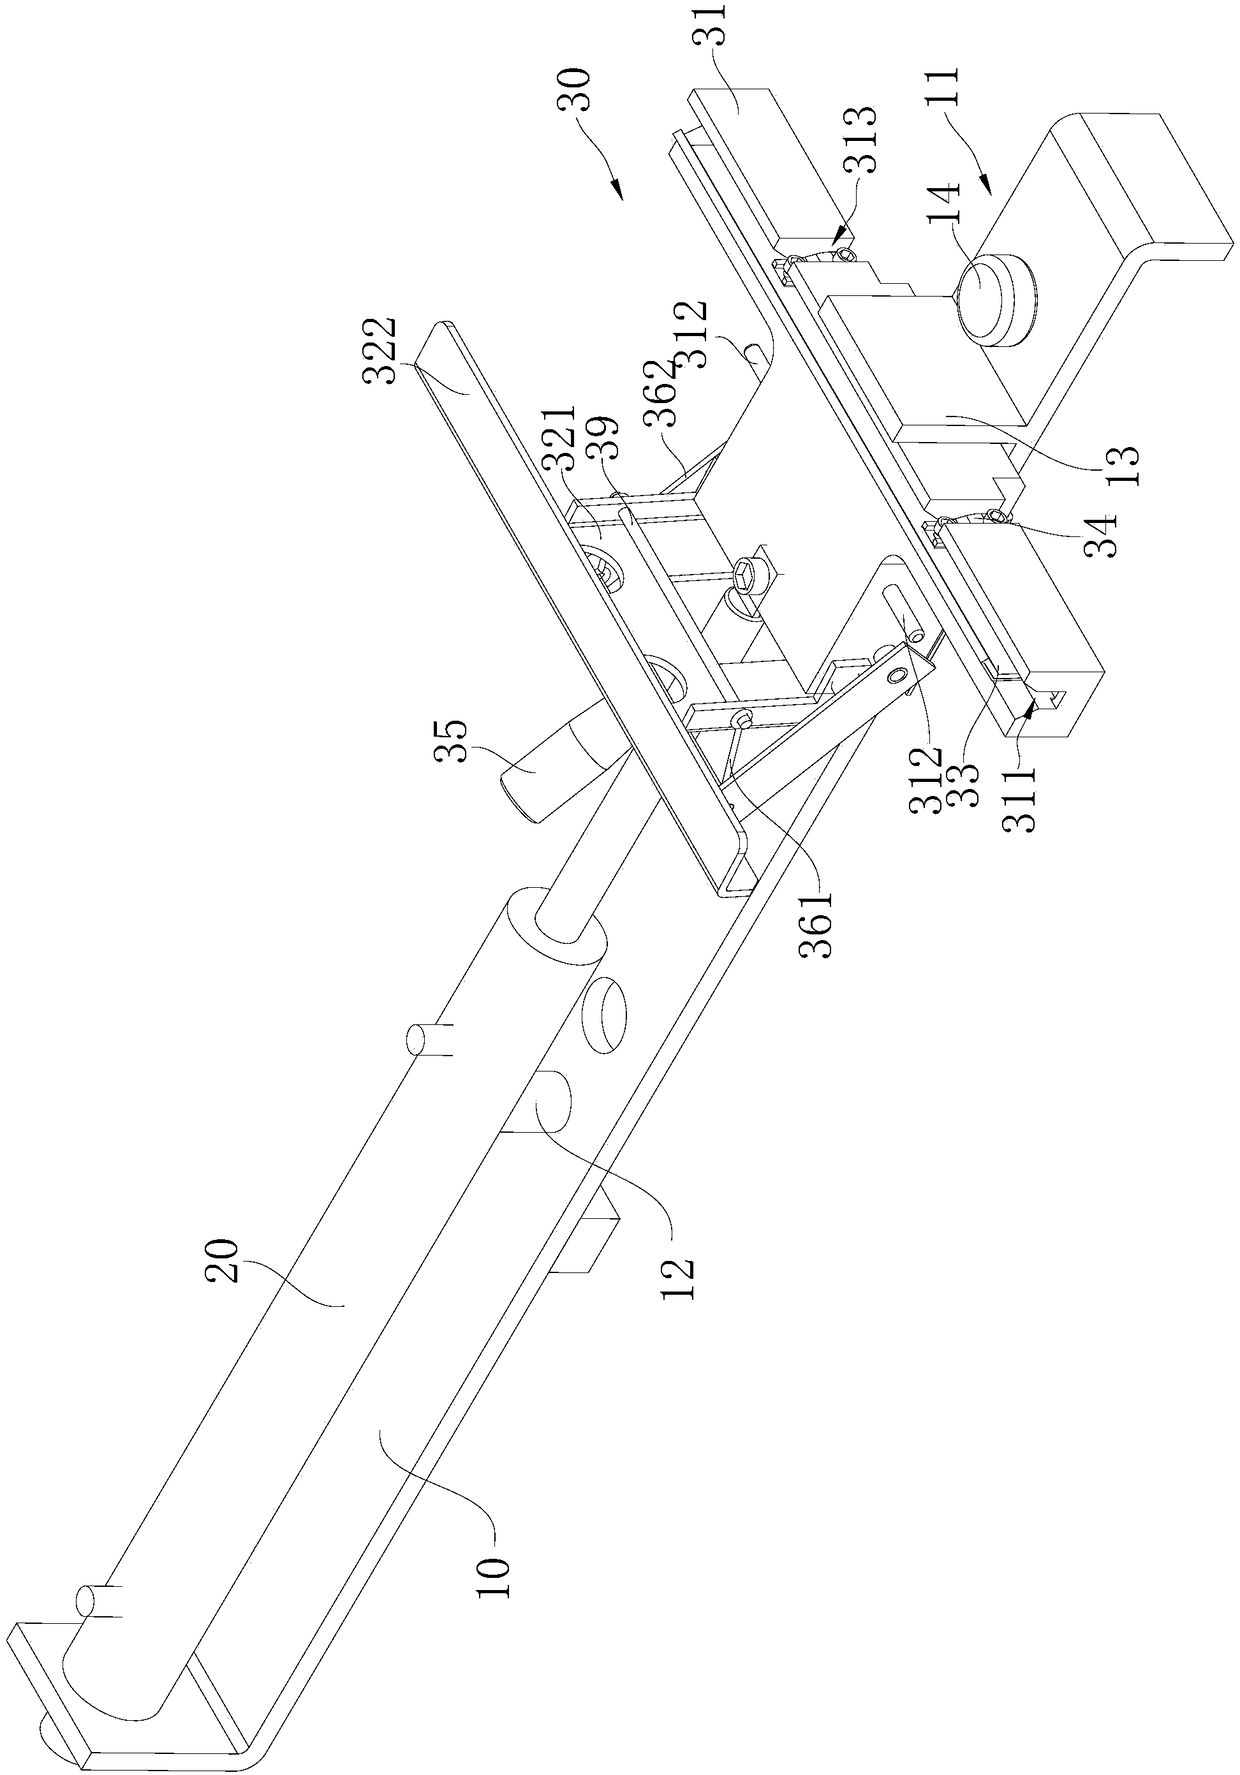 Silk screen production device